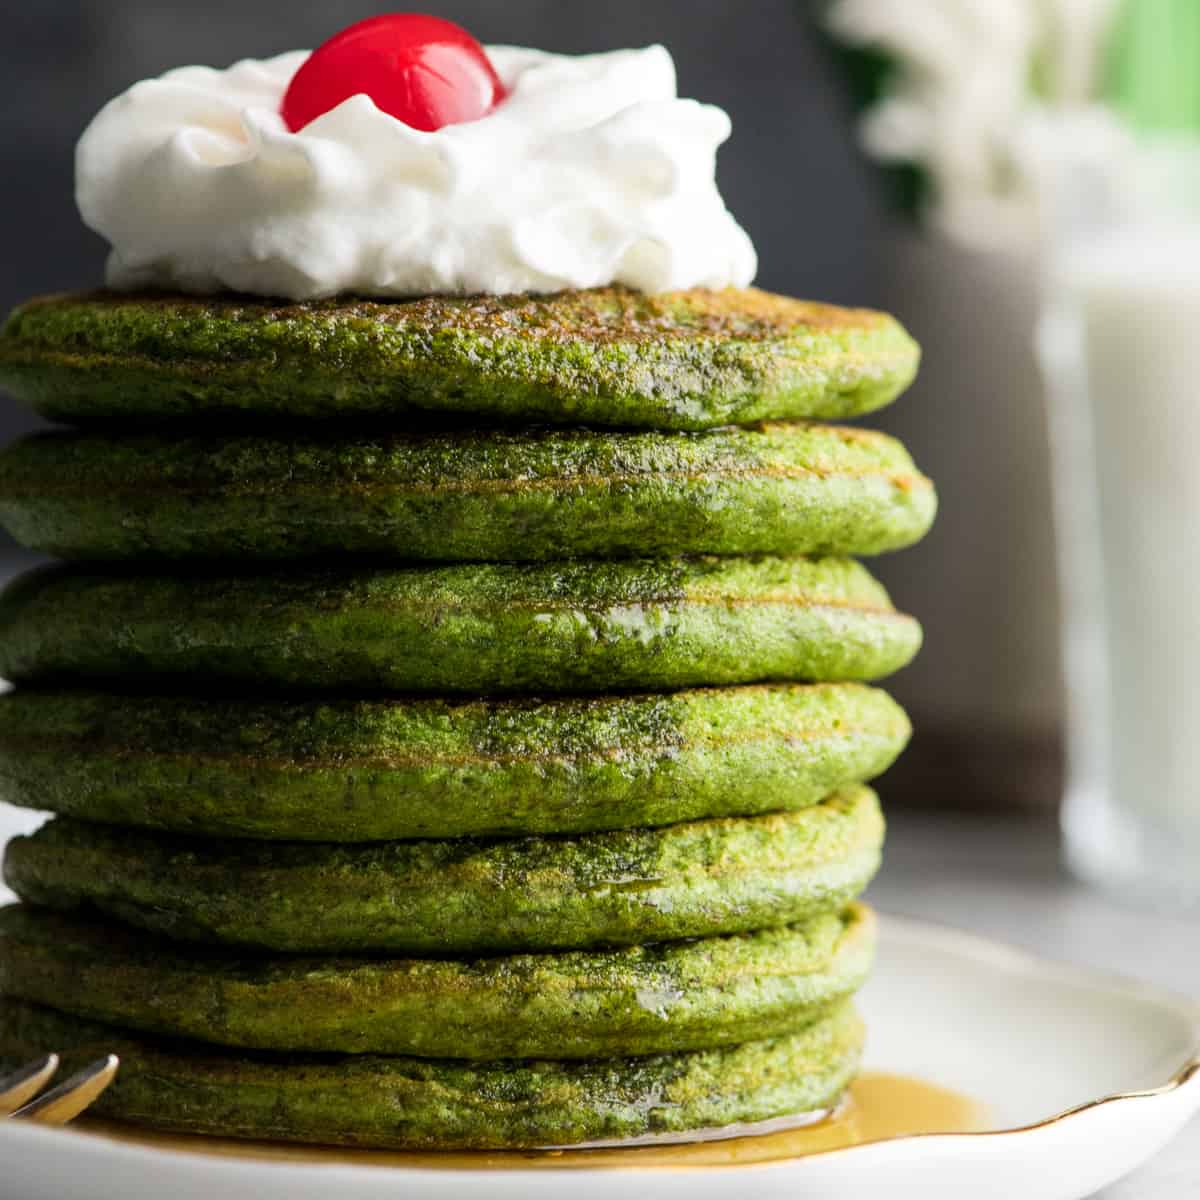 Front view of a stack of 7 spinach oatmeal pancakes topped with whipped cream and a cherry